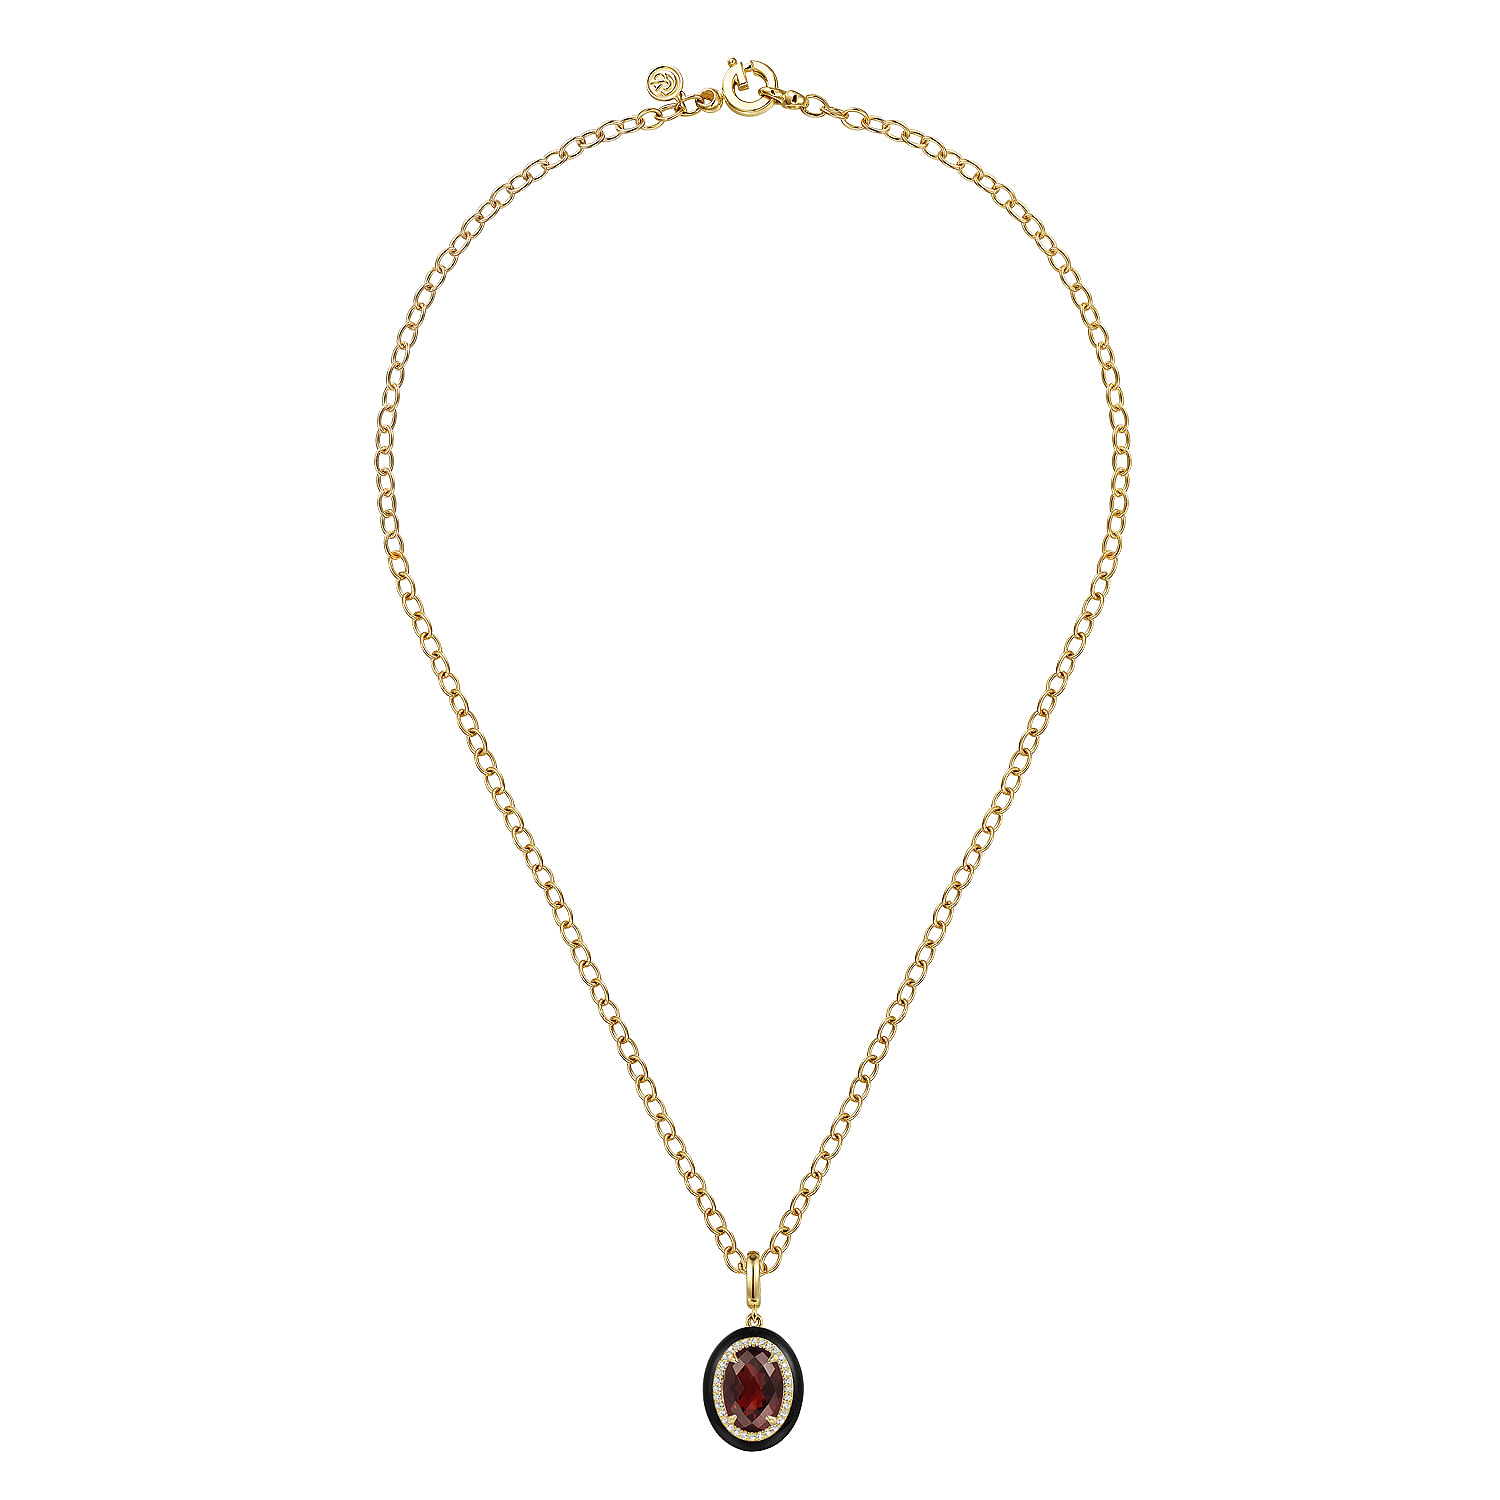 14K Yellow Gold Diamond and Oval Shape Garnet Necklace With Flower Pattern J-Back and Black Enamel